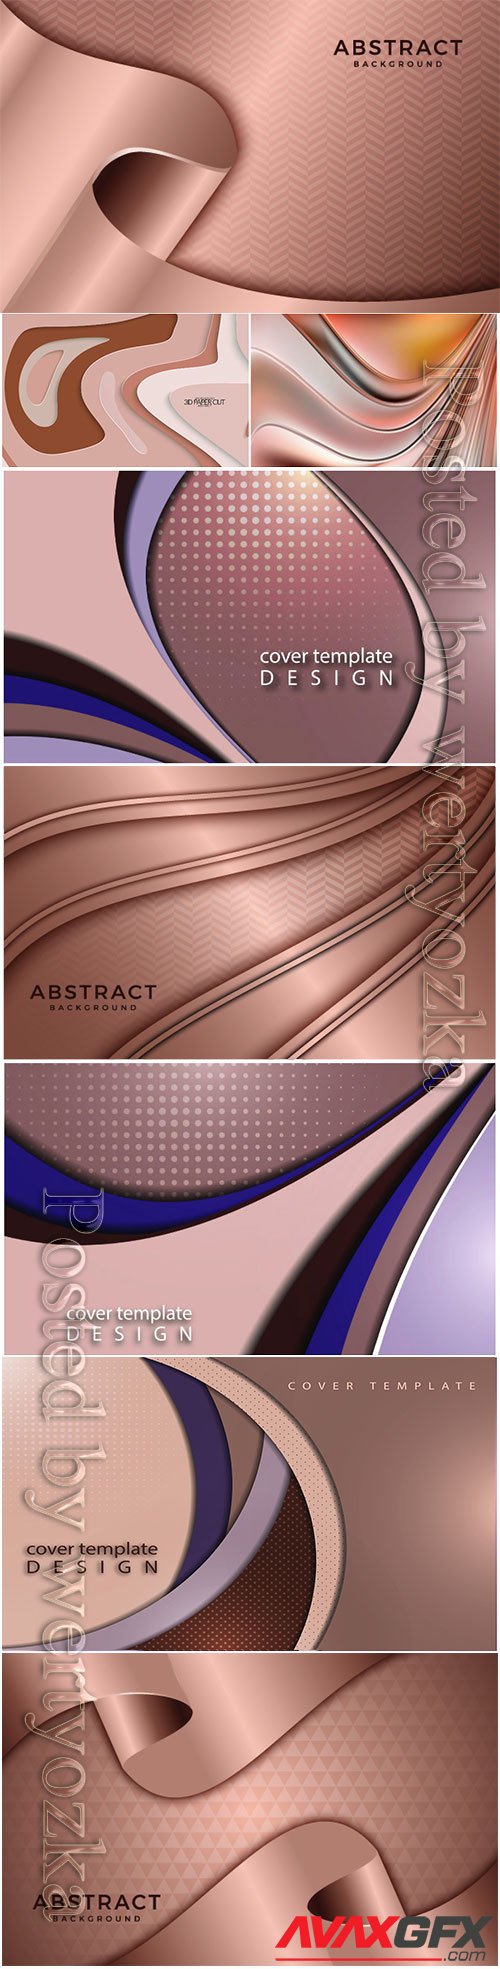 Metallic design for background and vector abstract poster